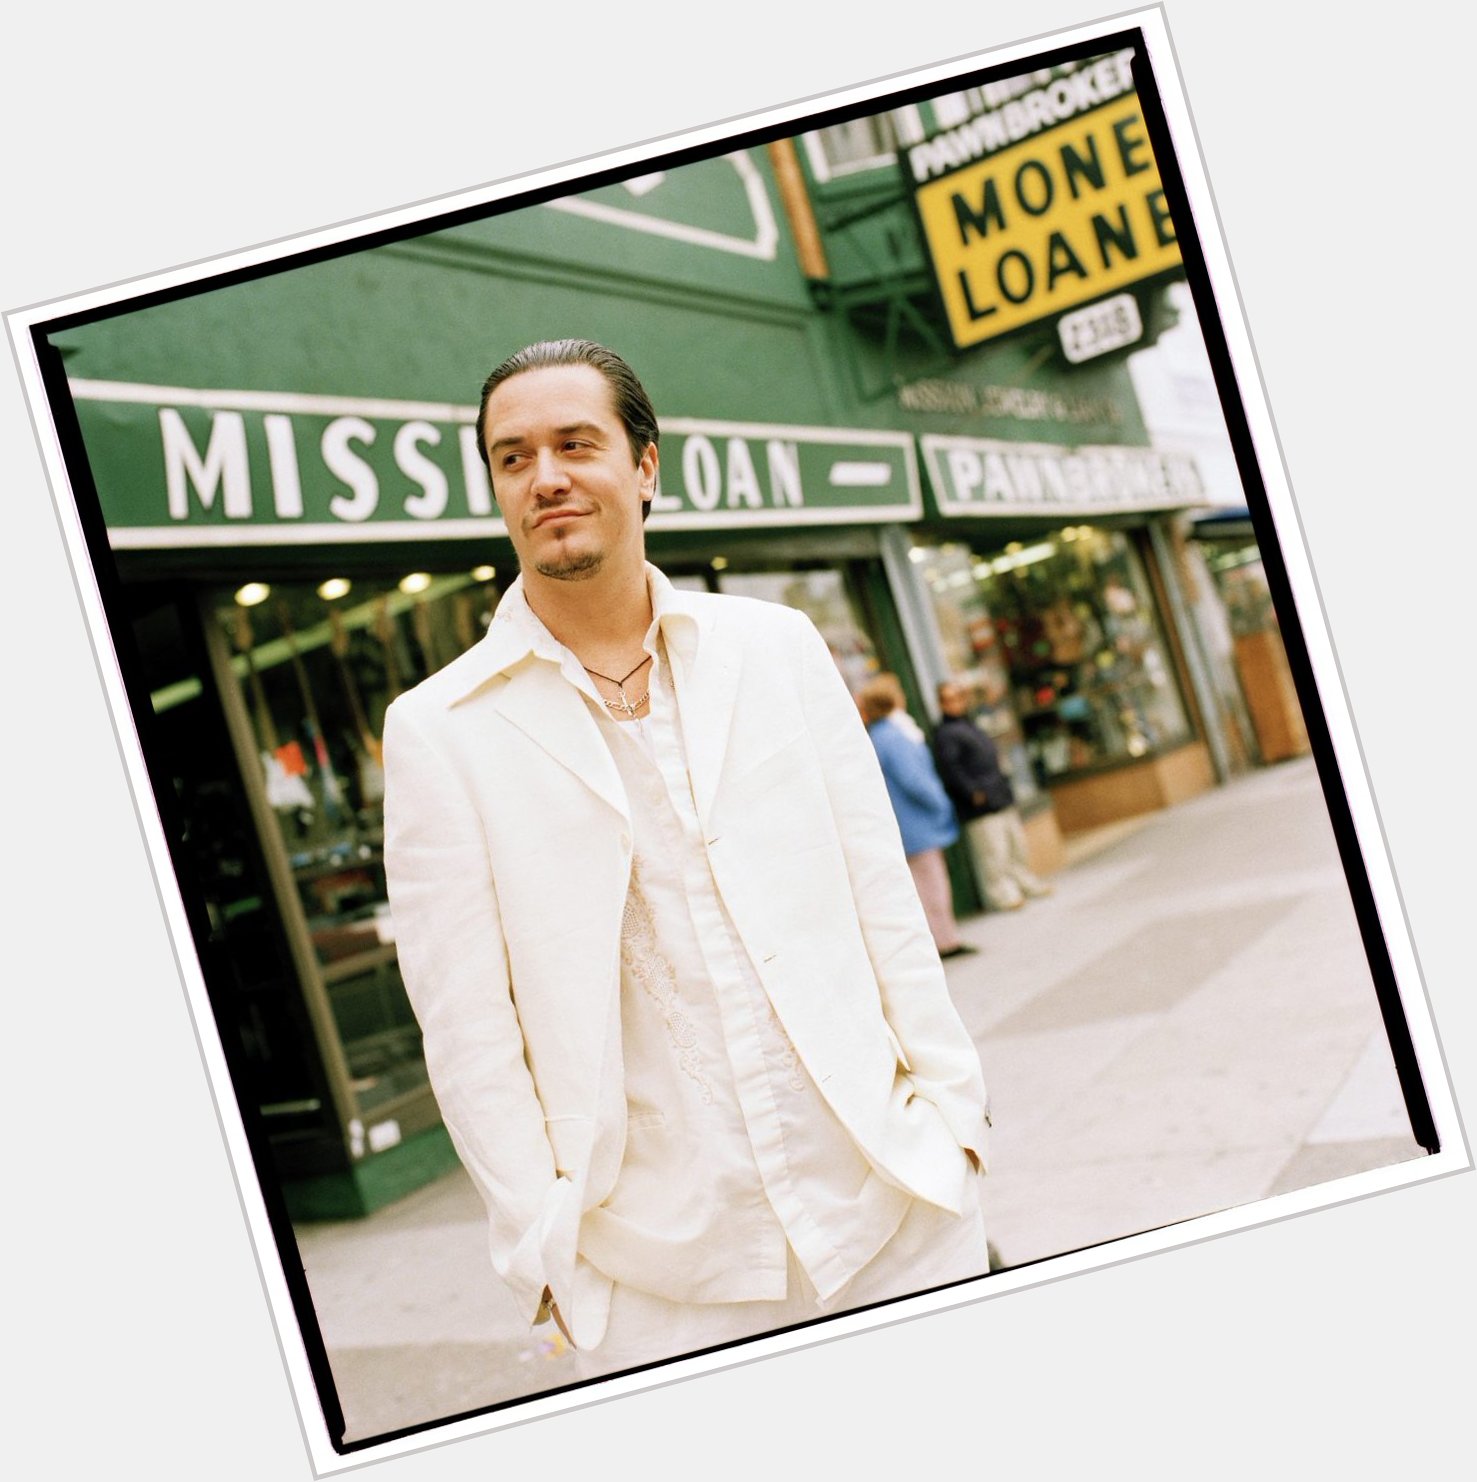 Happy birthday Mike Patton of 